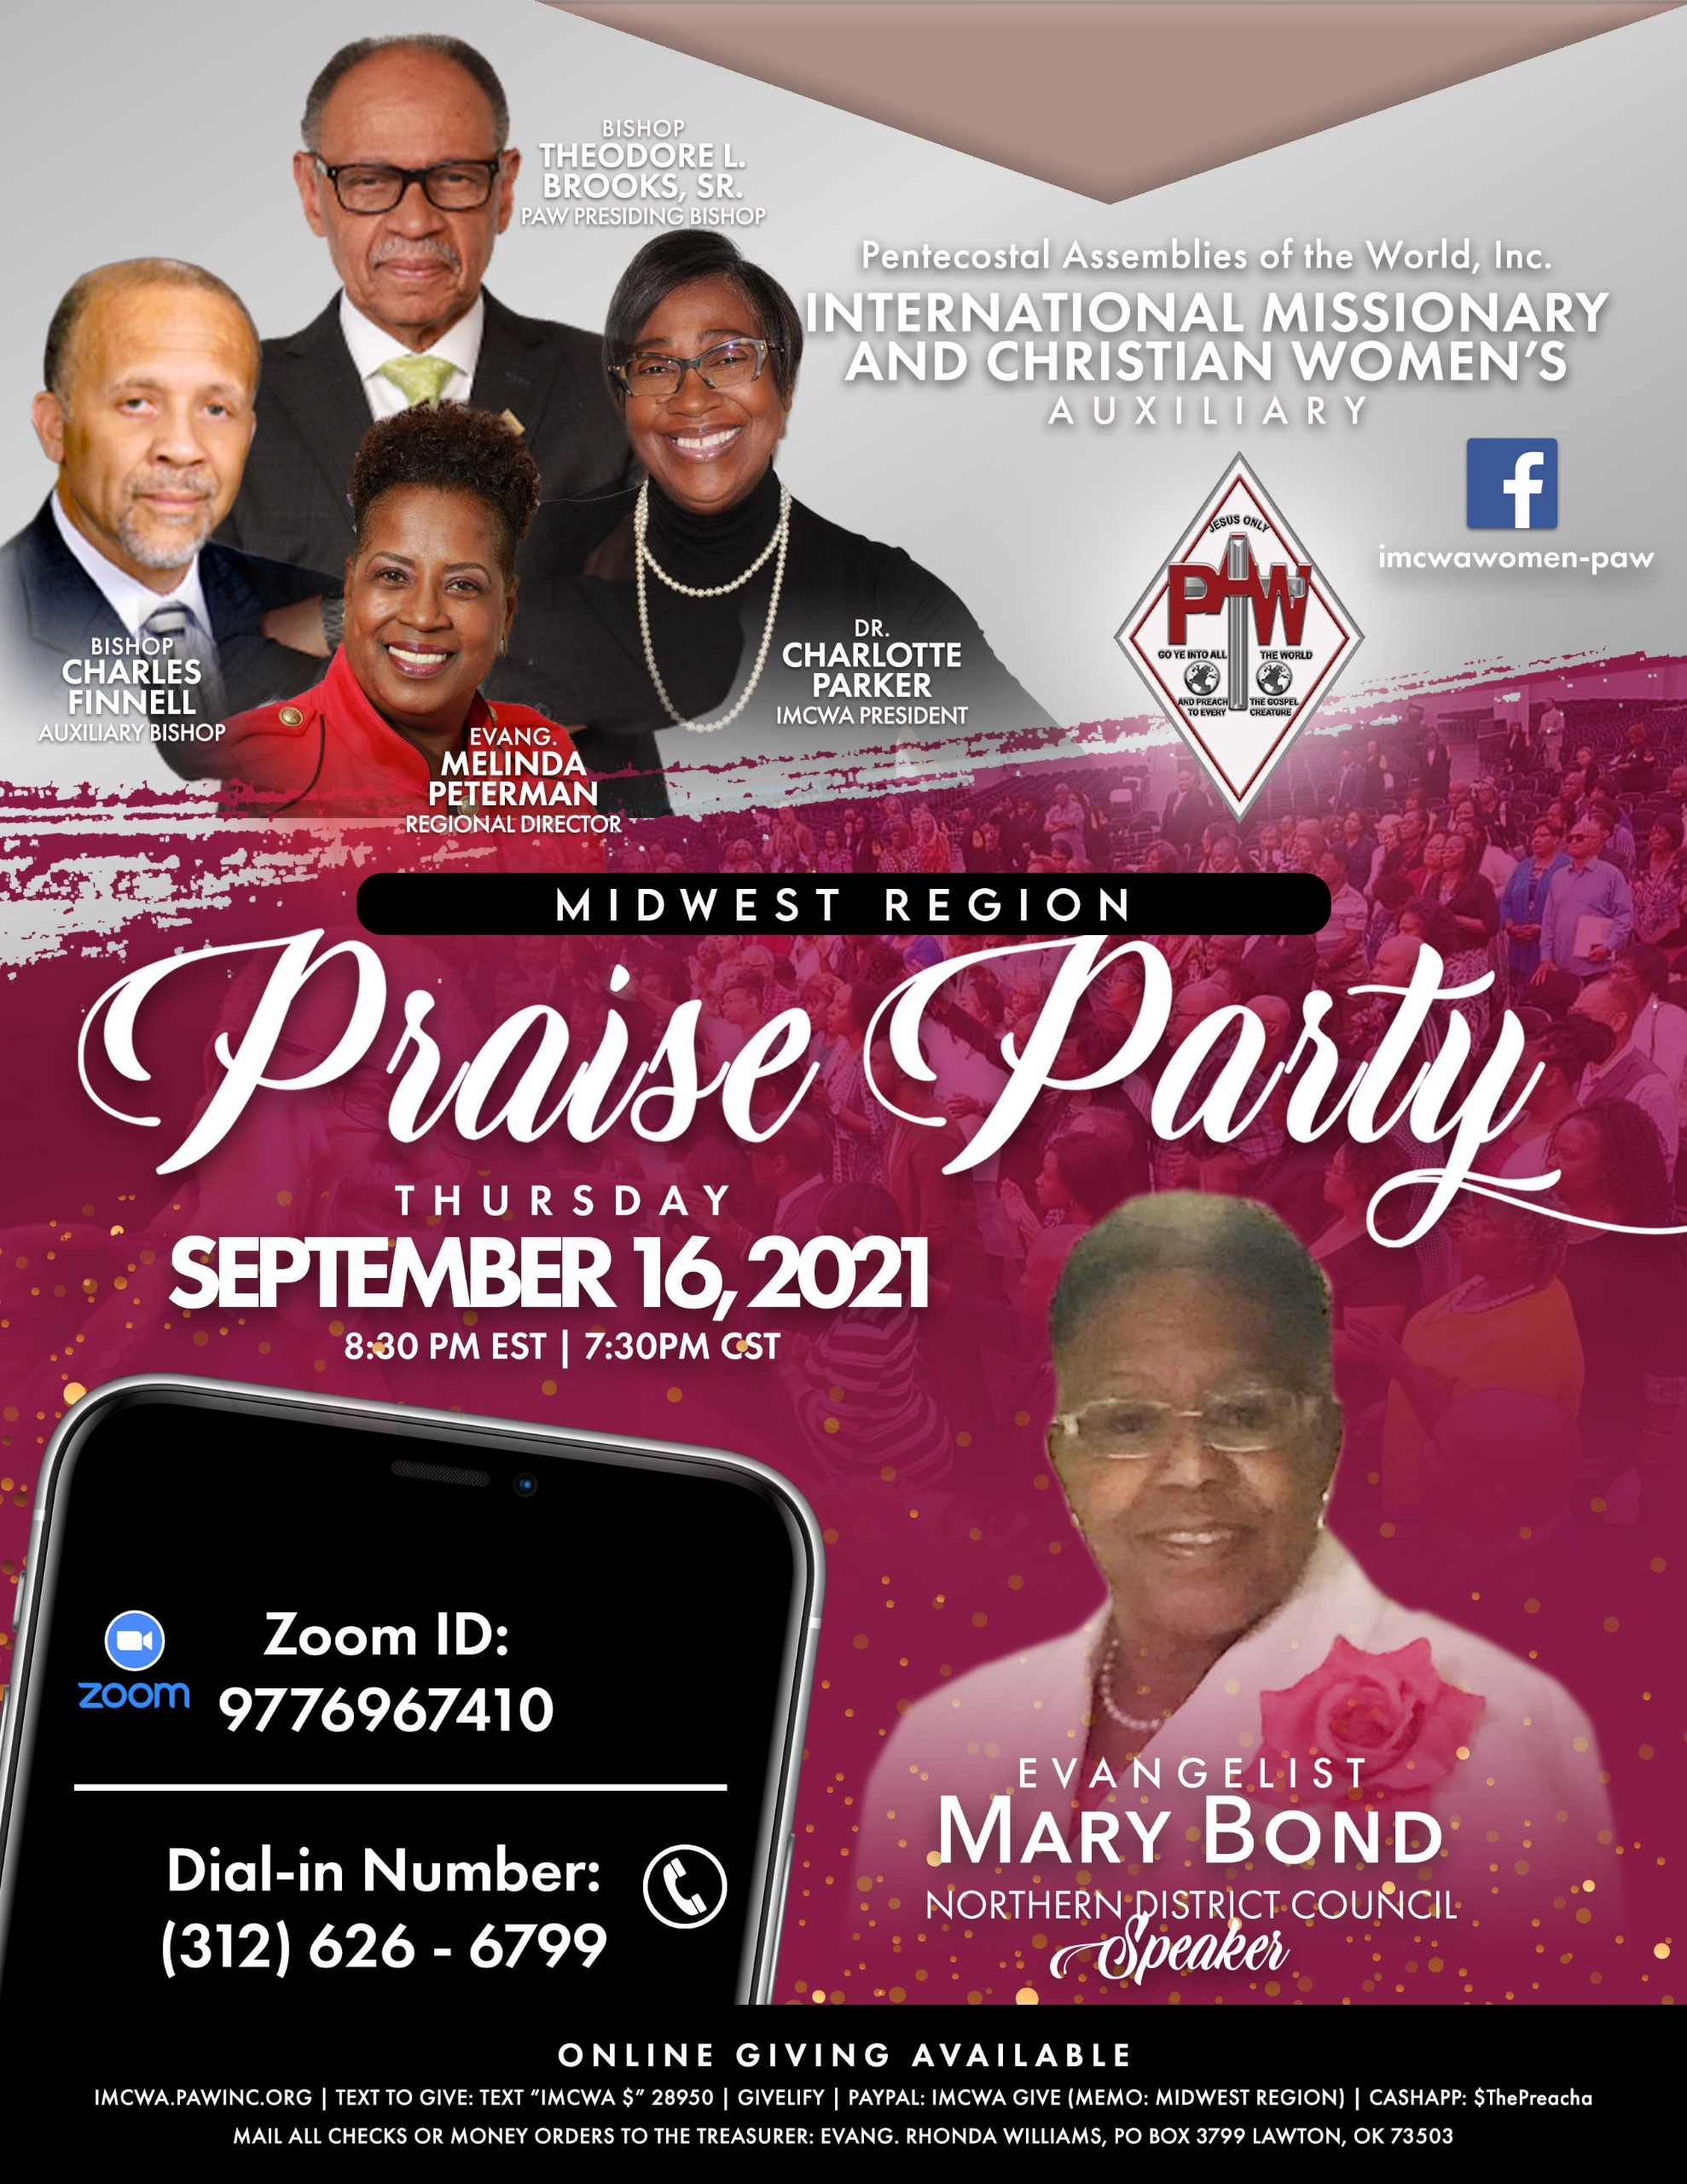 Midwest Praise Party Flyer 09-16-2021